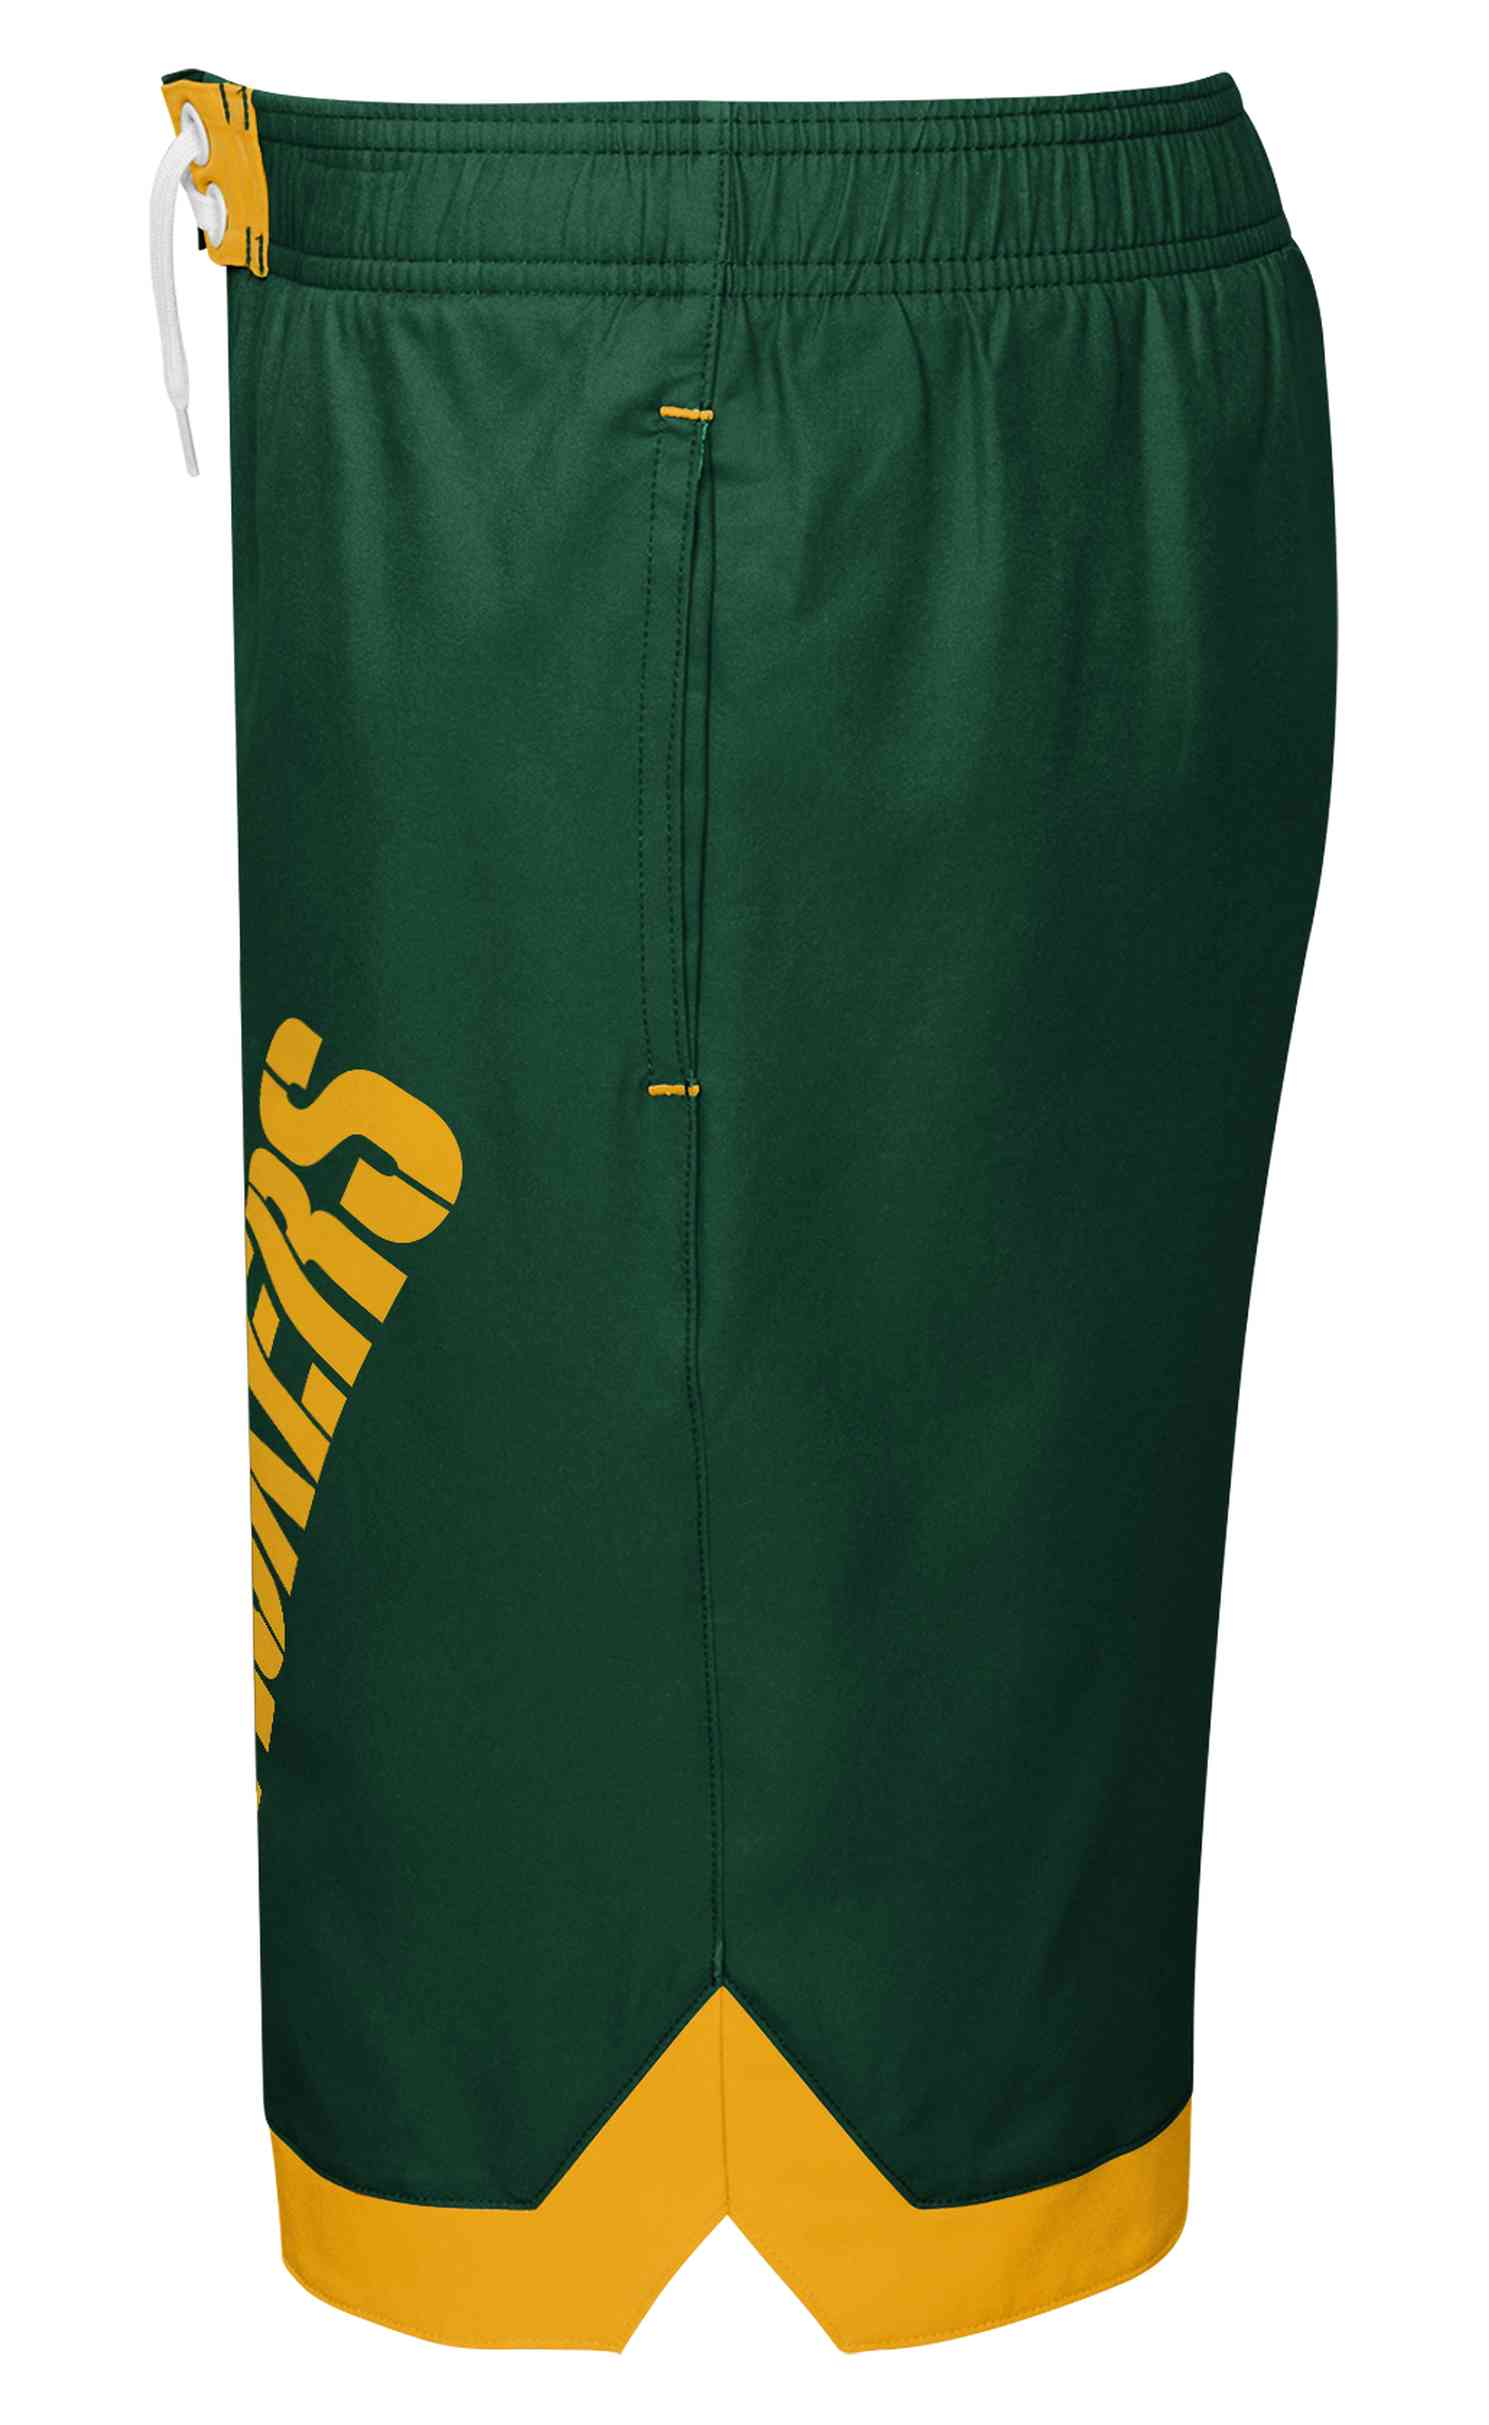 Mitchell & Ness - NFL Green Bay Packers Conch Bay Kinder Board Shorts